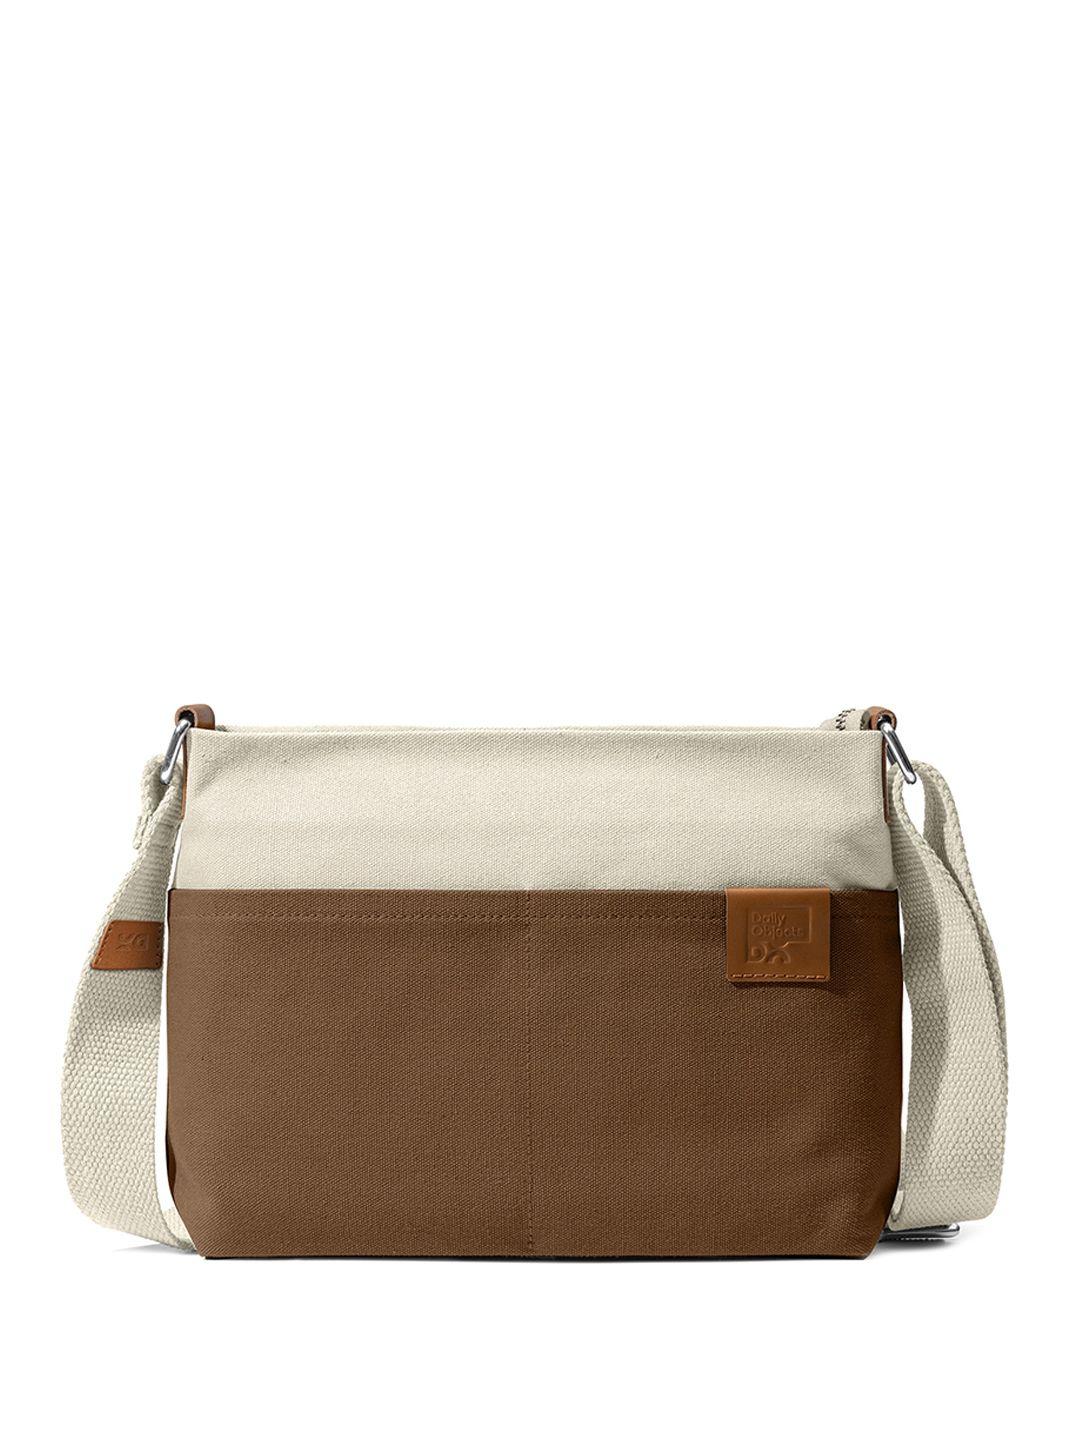 dailyobjects unisex colorblocked structured sling bag